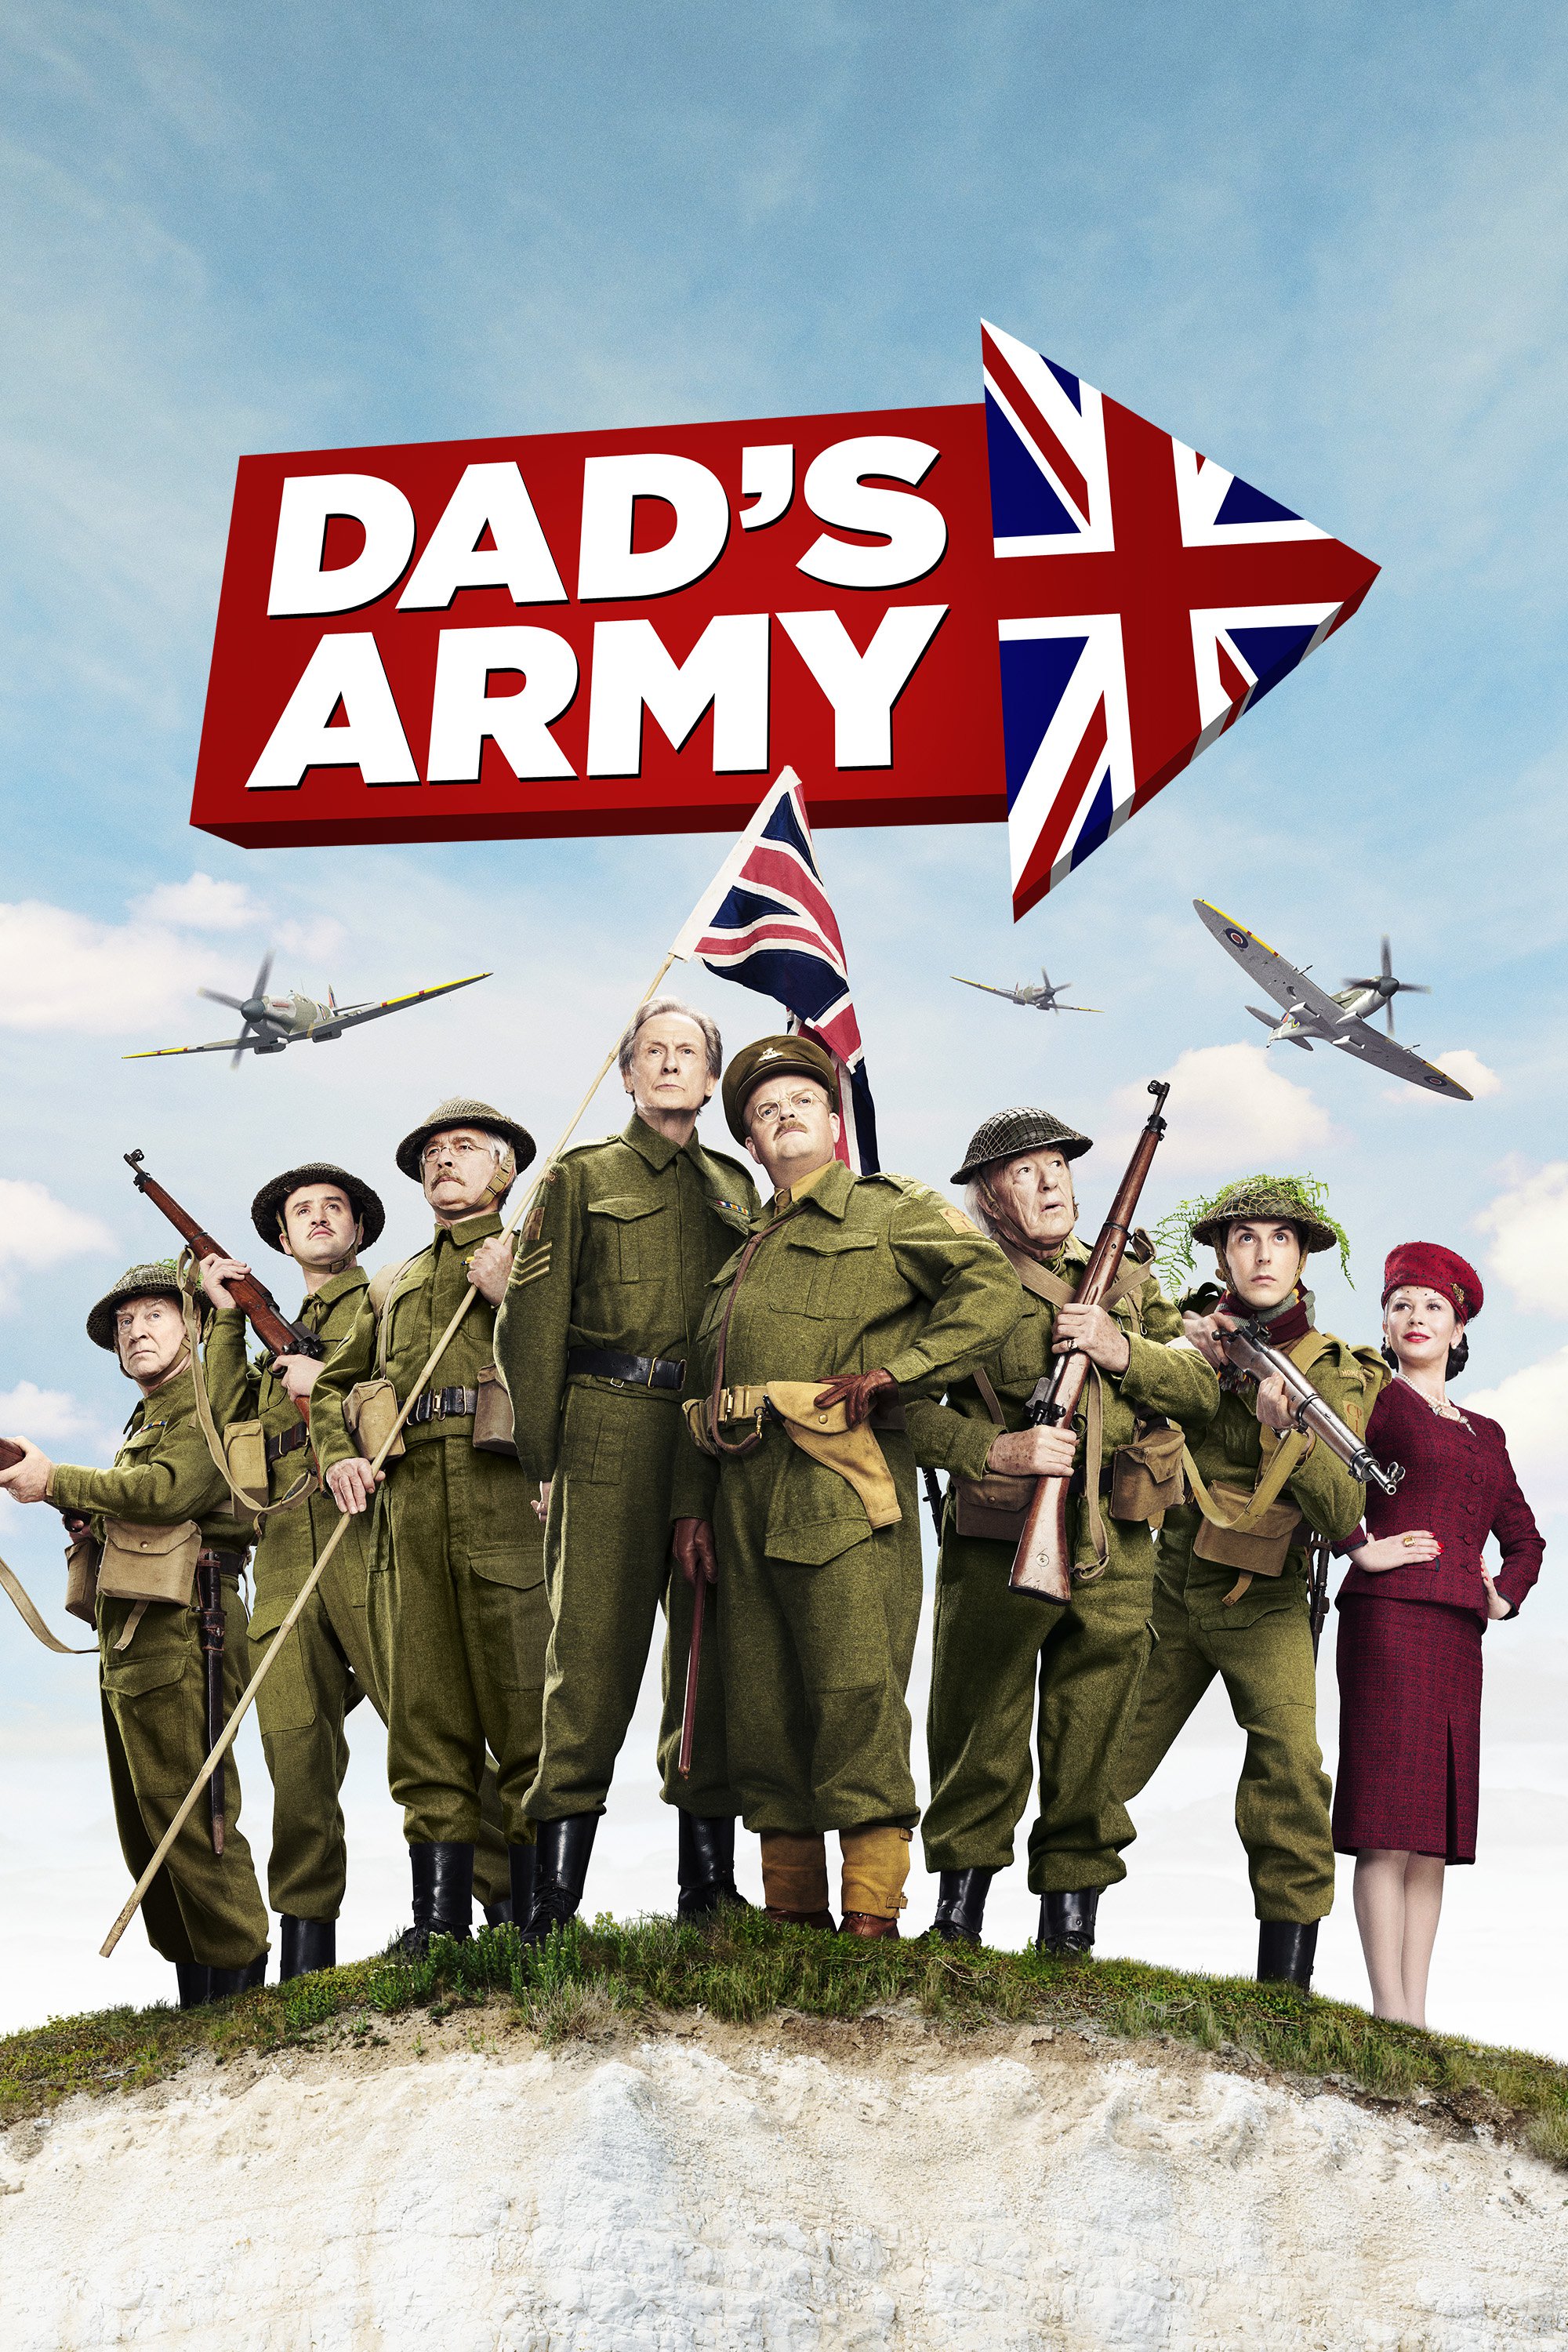 Poster for the movie "Dad's Army"